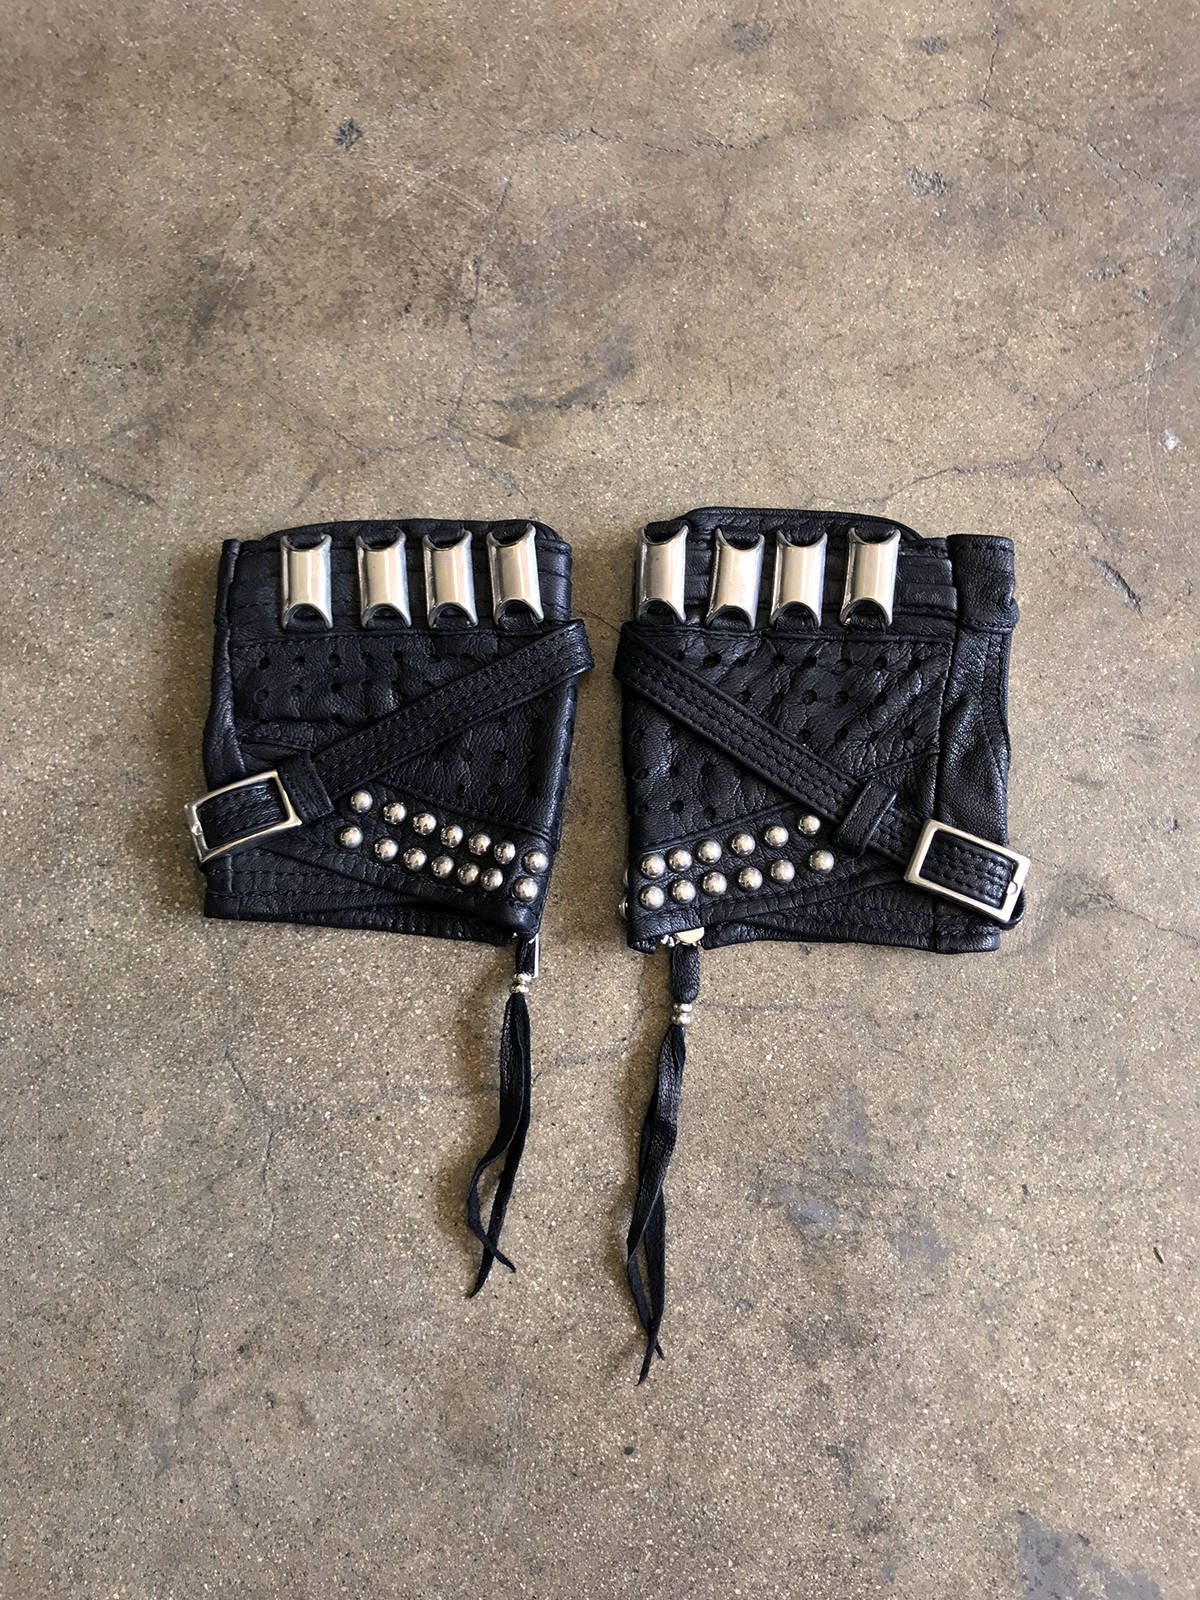 KNUCKLE DUSTER  Black Leather Fingerless Unisex Motorcycle Driving Gloves